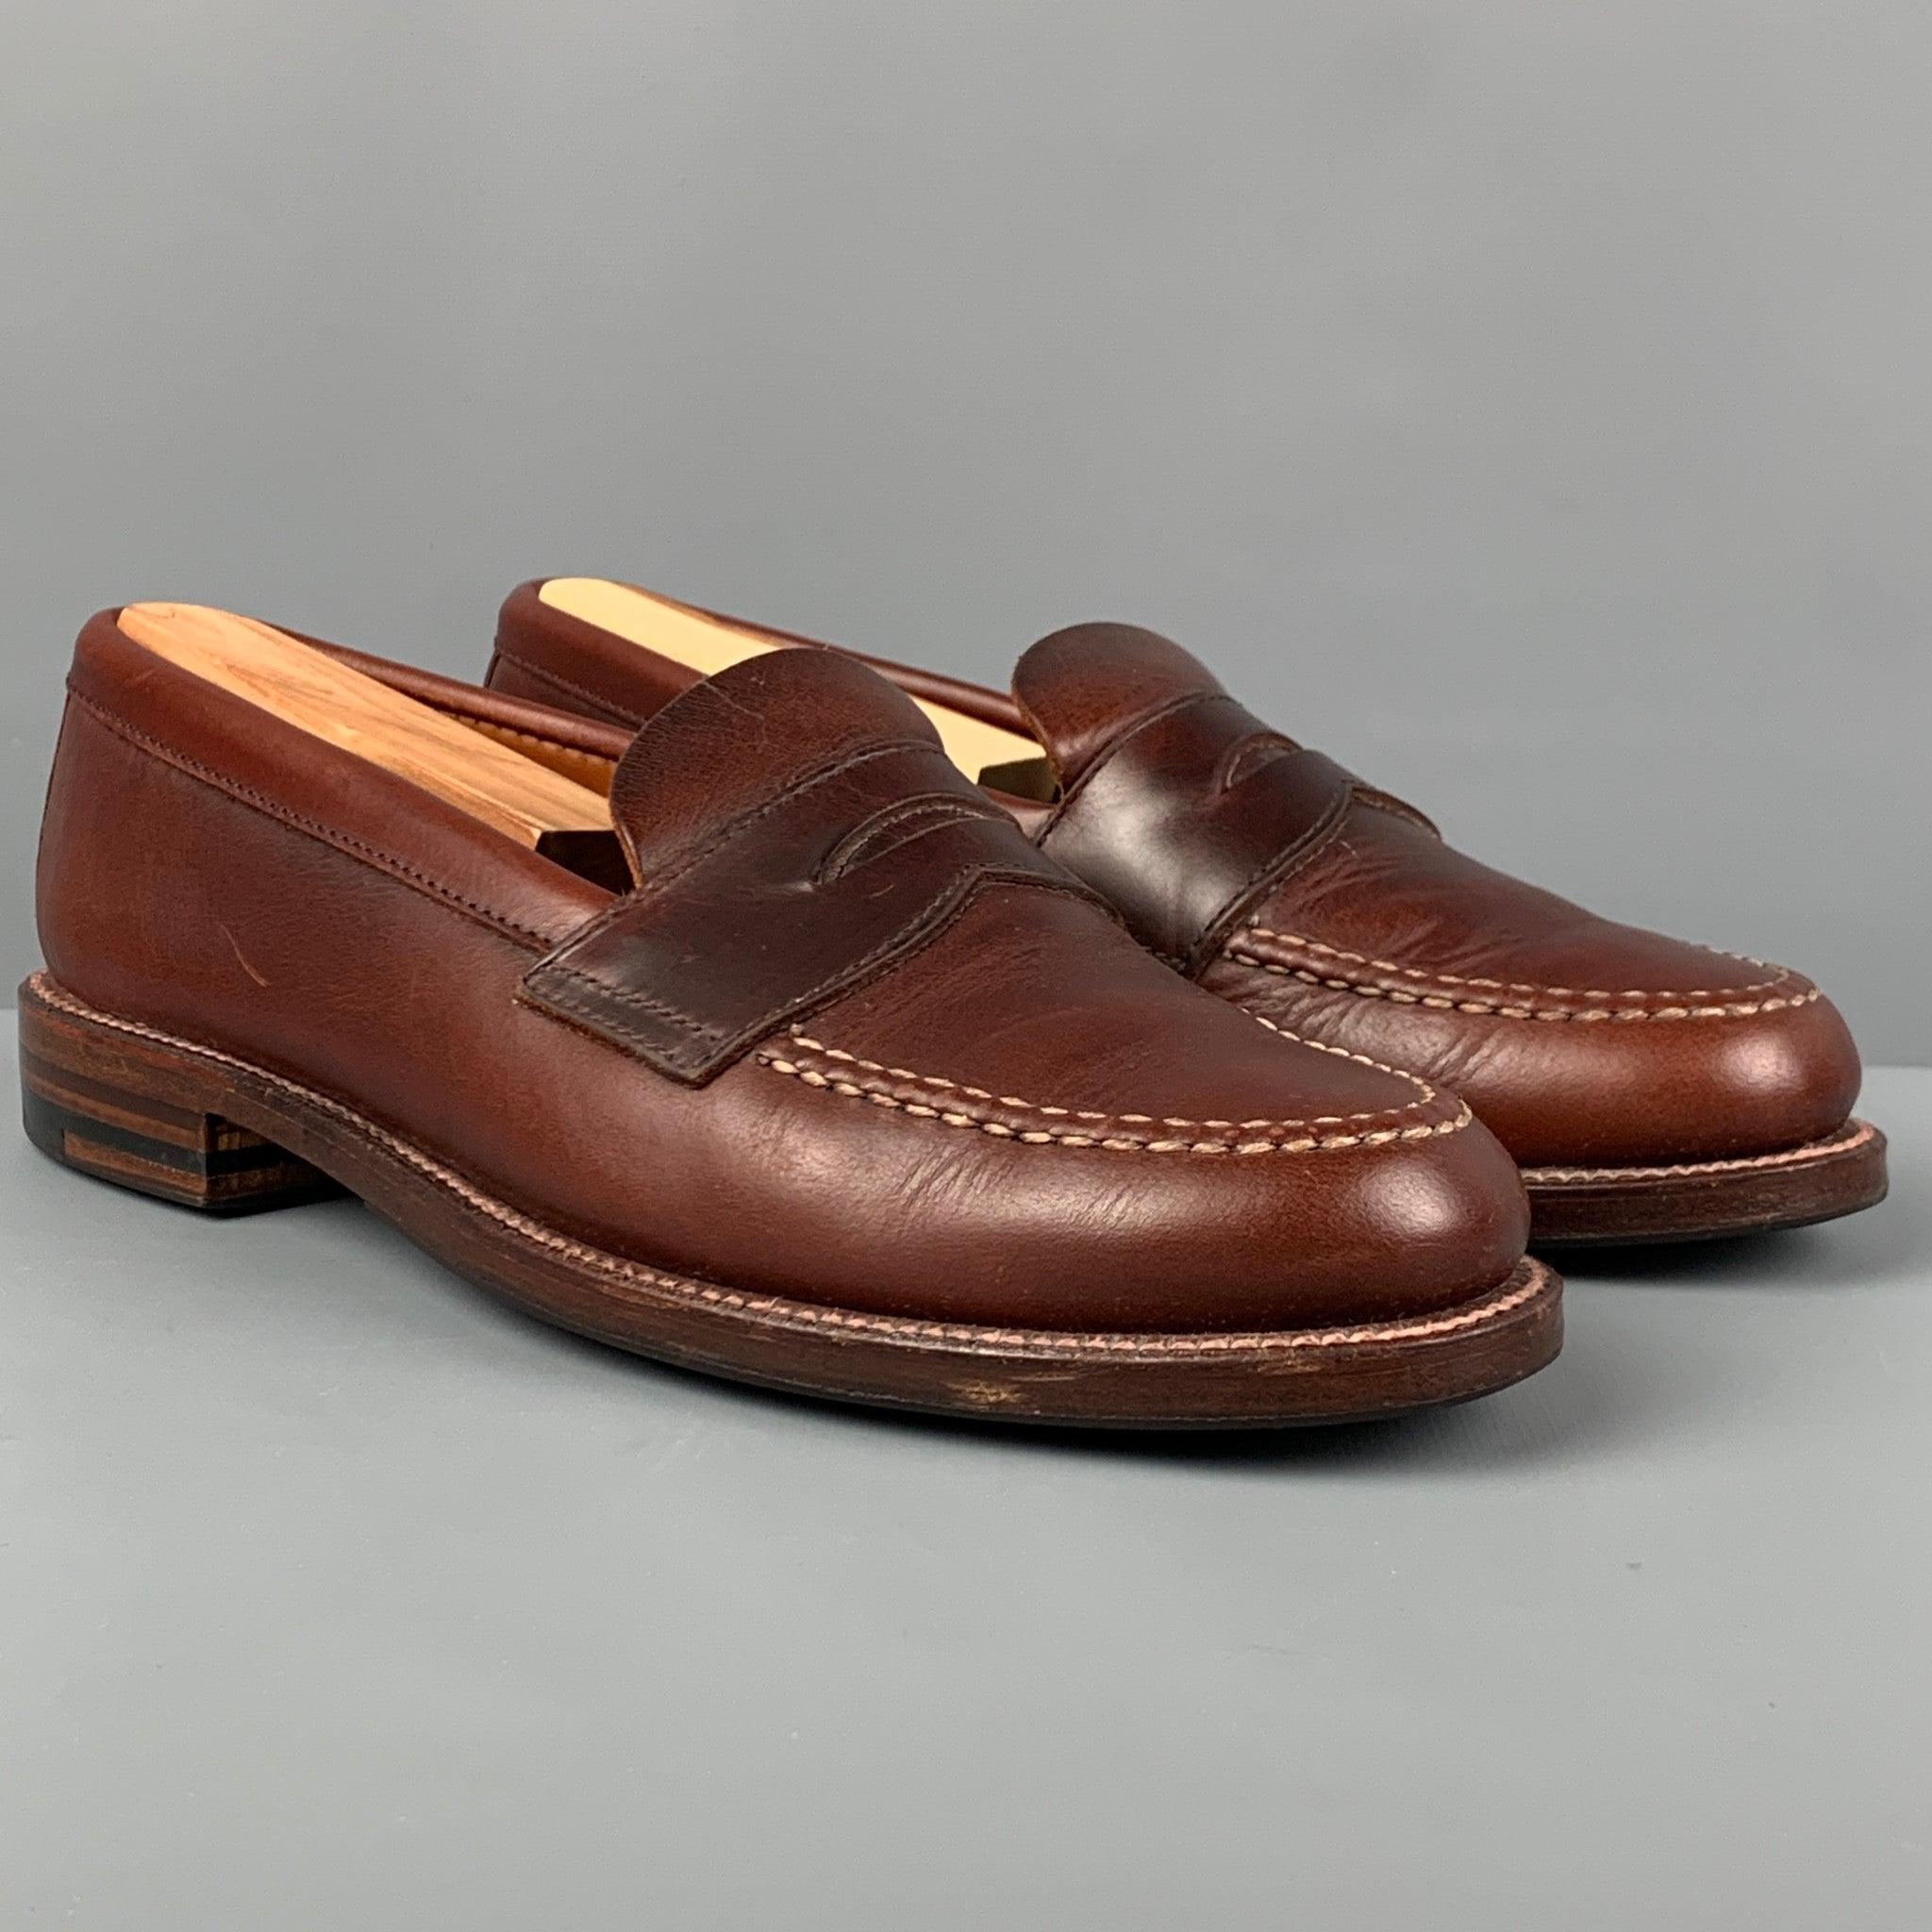 ALDEN loafers comes in a brown leather featuring contrast stitching, slip on style, and a penny strap. Comes with box and shoe trees. Made in USA.
Very Good
Pre-Owned Condition. 

Marked:   6.5 178317Outsole: 10.75 inches  x 3.75 inches 
  
  
